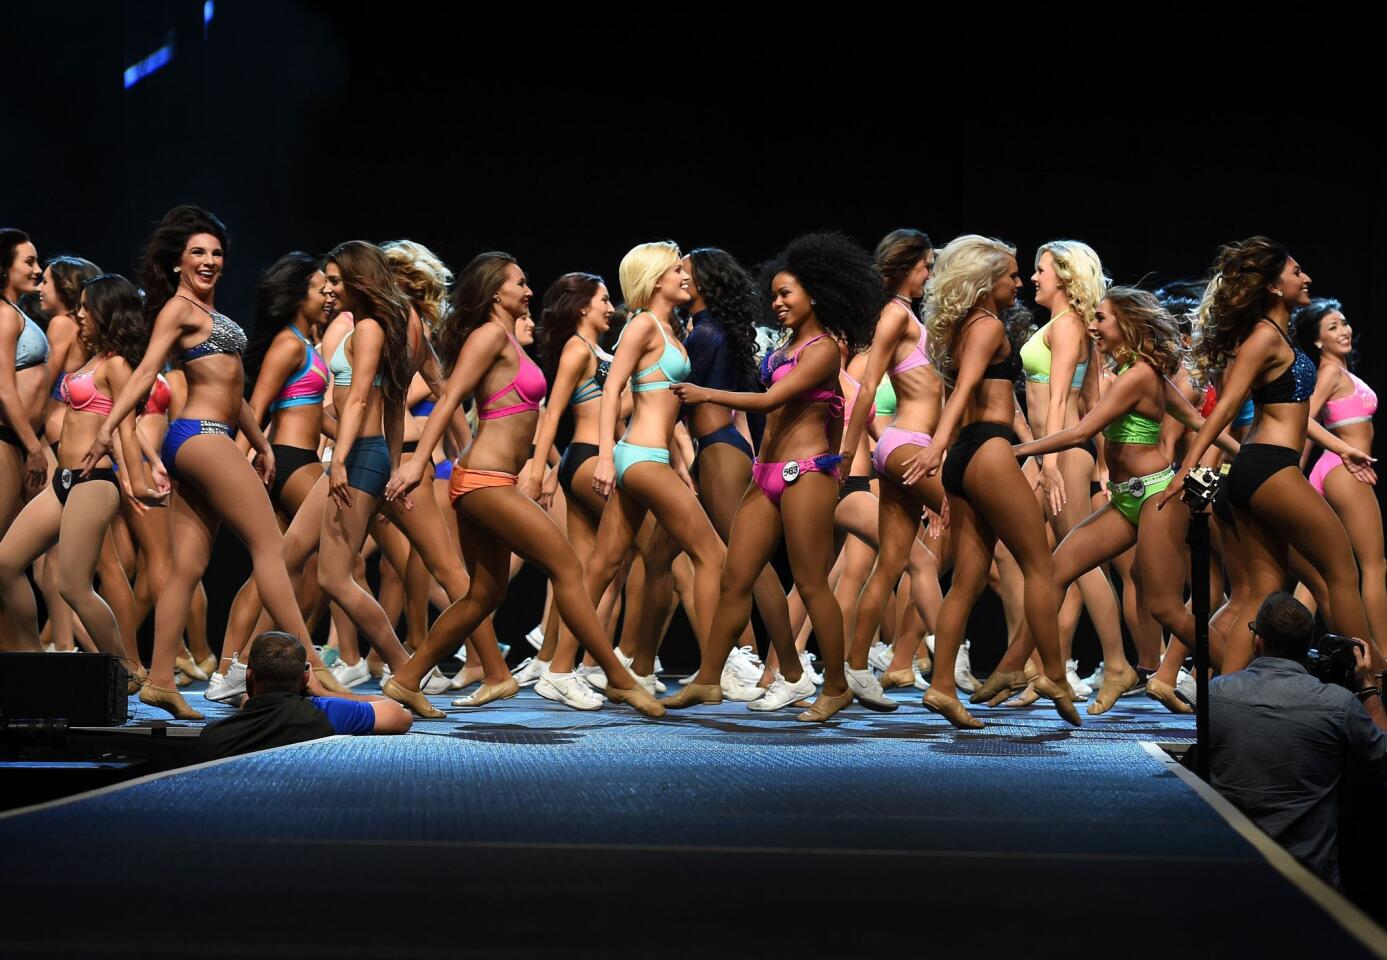 TOPSHOT - Cheerleading candidates parade on stage during the Los Angeles Rams Cheerleading Final auditions at the Forum in Los Angeles, California on April 17, 2016. The St. Louis Rams, relocated to Los Angeles for the 2016 season, have chosen 30 new cheerleaders from the city. / AFP PHOTO / Mark RalstonMARK RALSTON/AFP/Getty Images ** OUTS - ELSENT, FPG, CM - OUTS * NM, PH, VA if sourced by CT, LA or MoD **